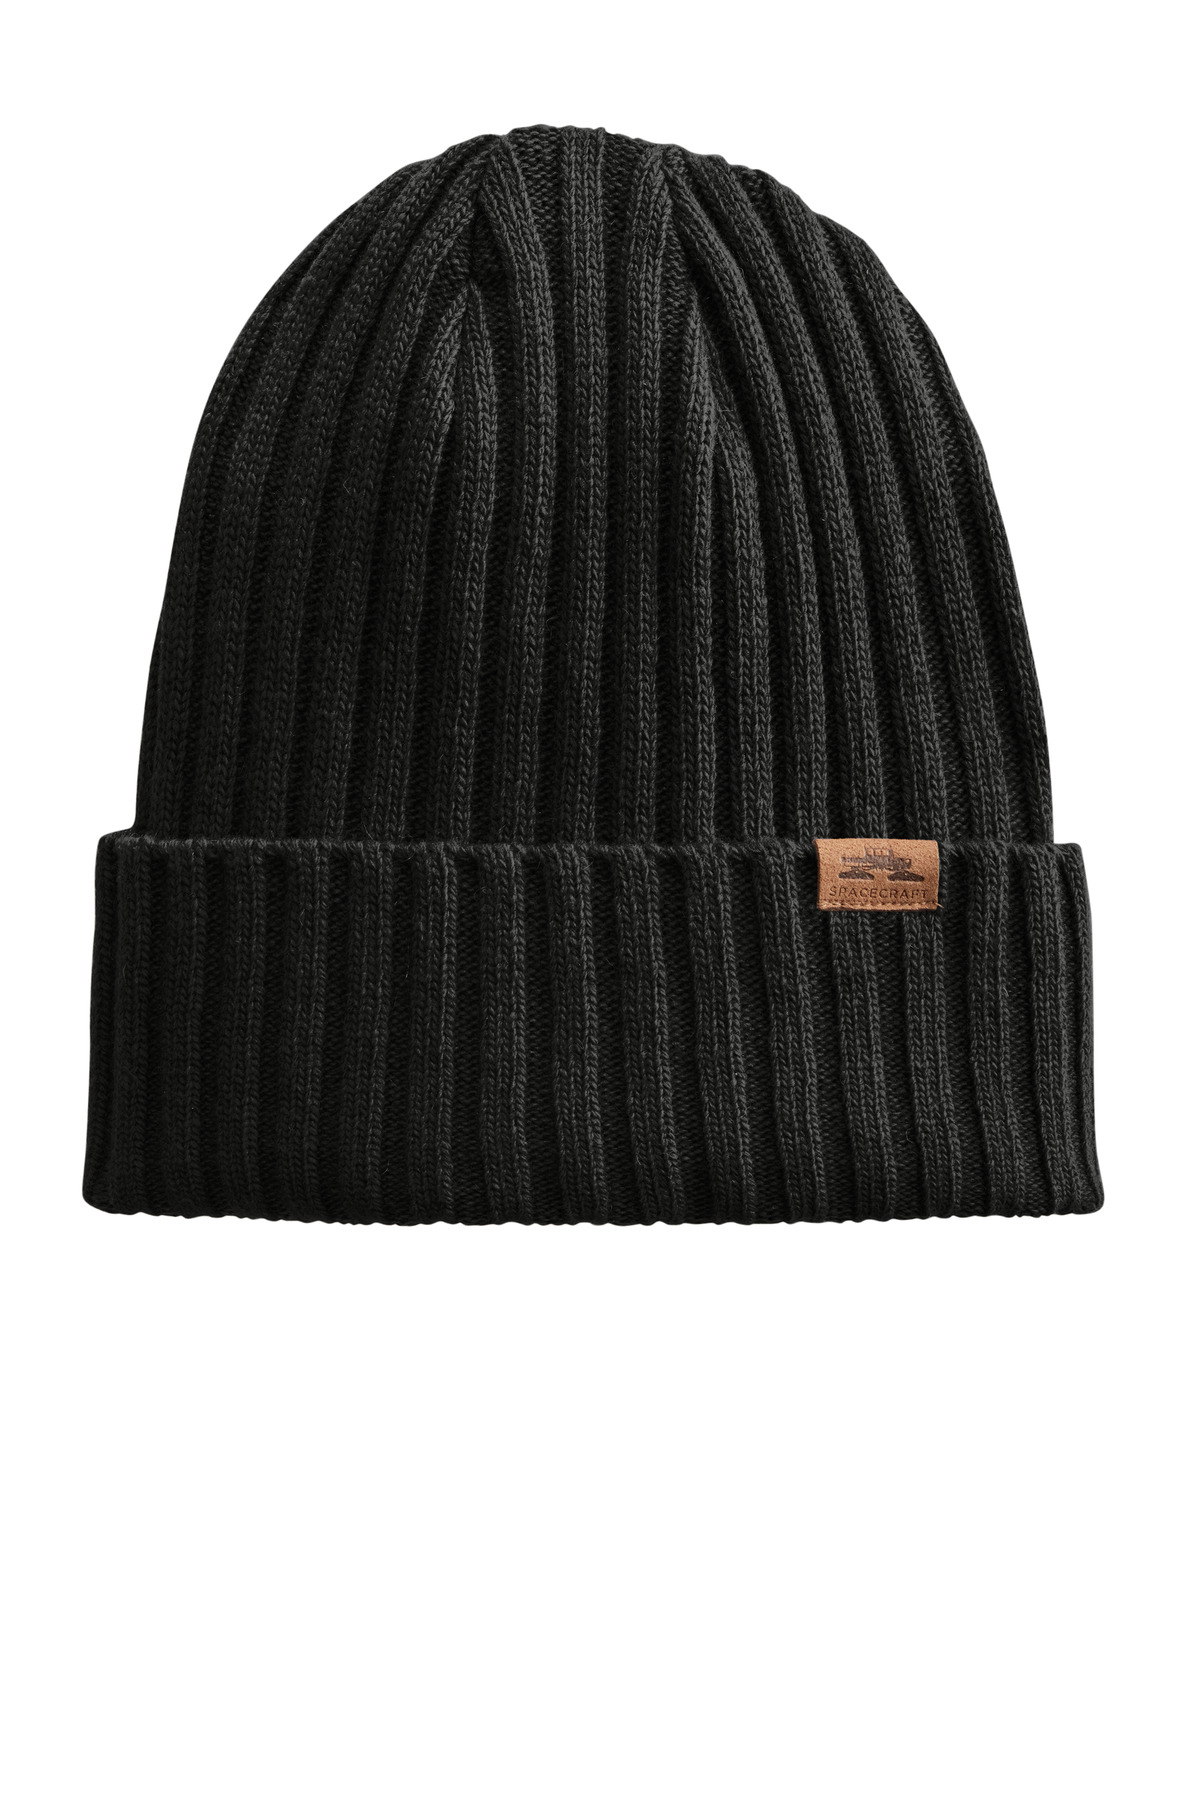 LIMITED EDITION Spacecraft Square Knot Beanie-